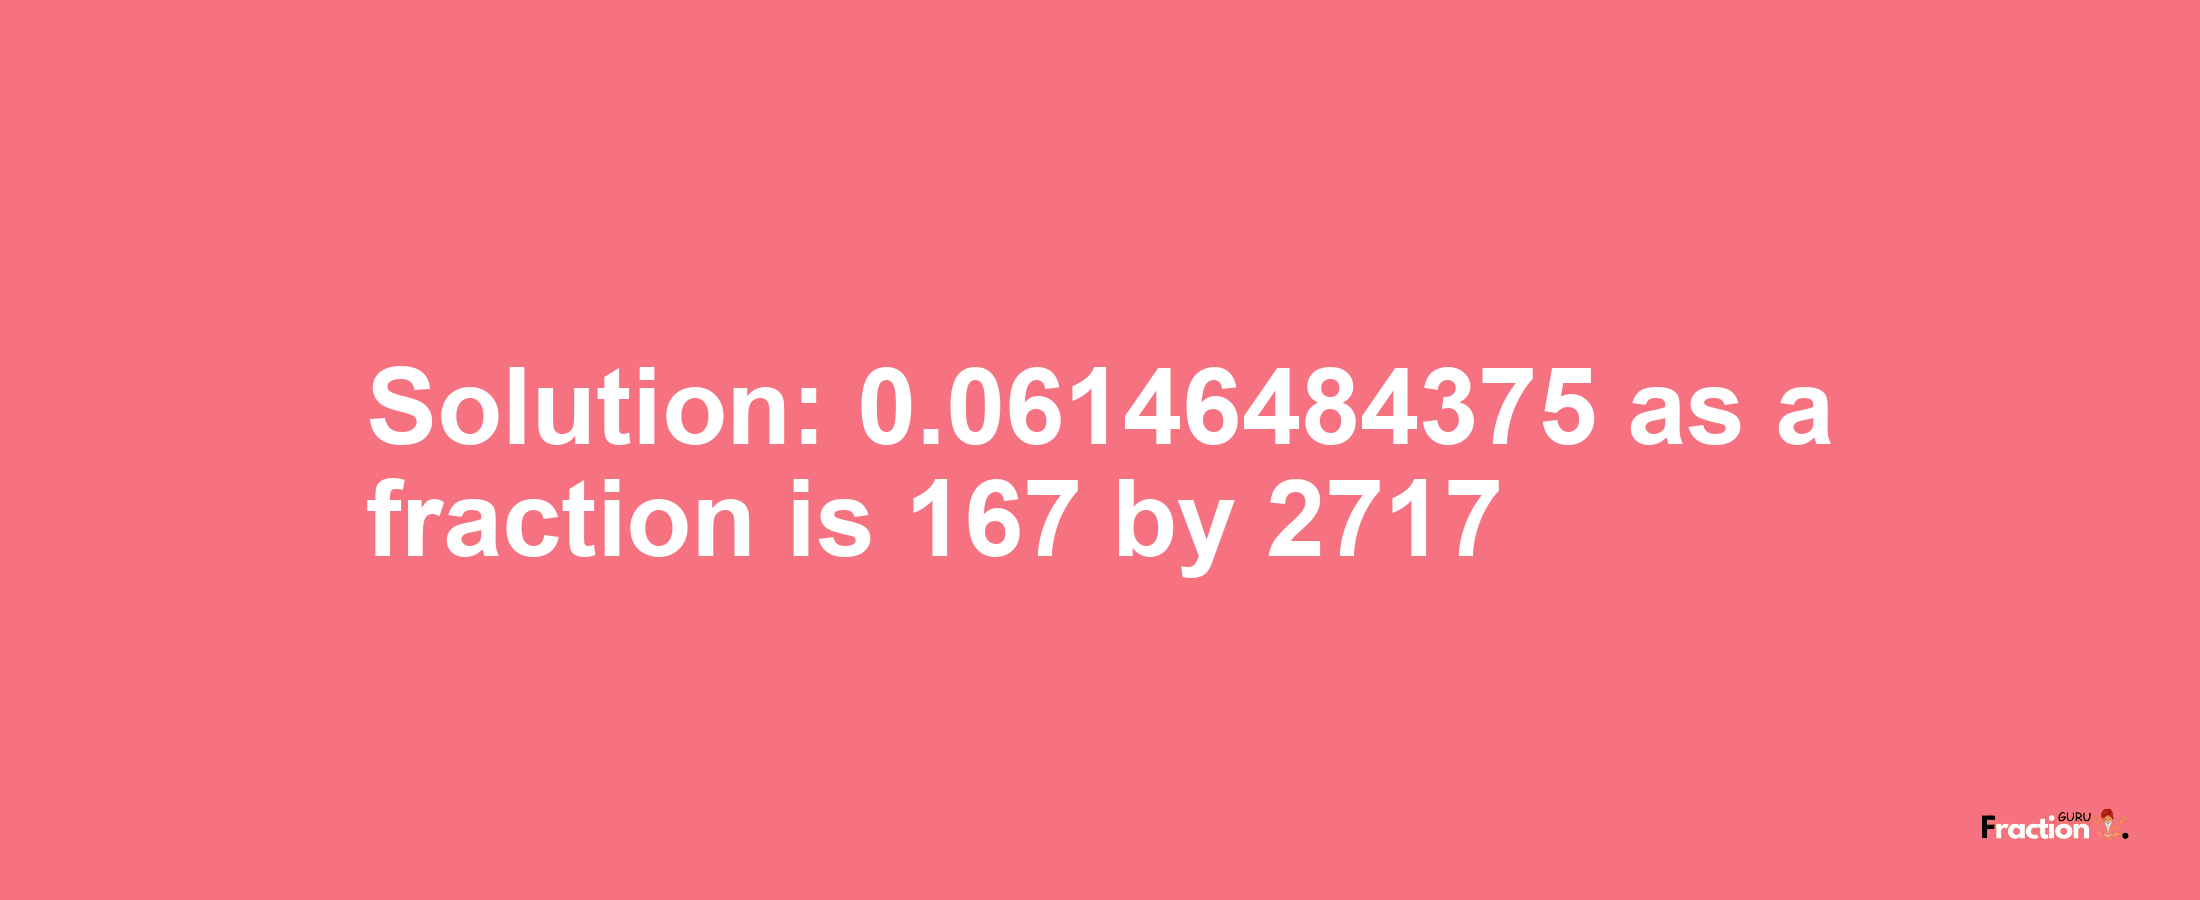 Solution:0.06146484375 as a fraction is 167/2717